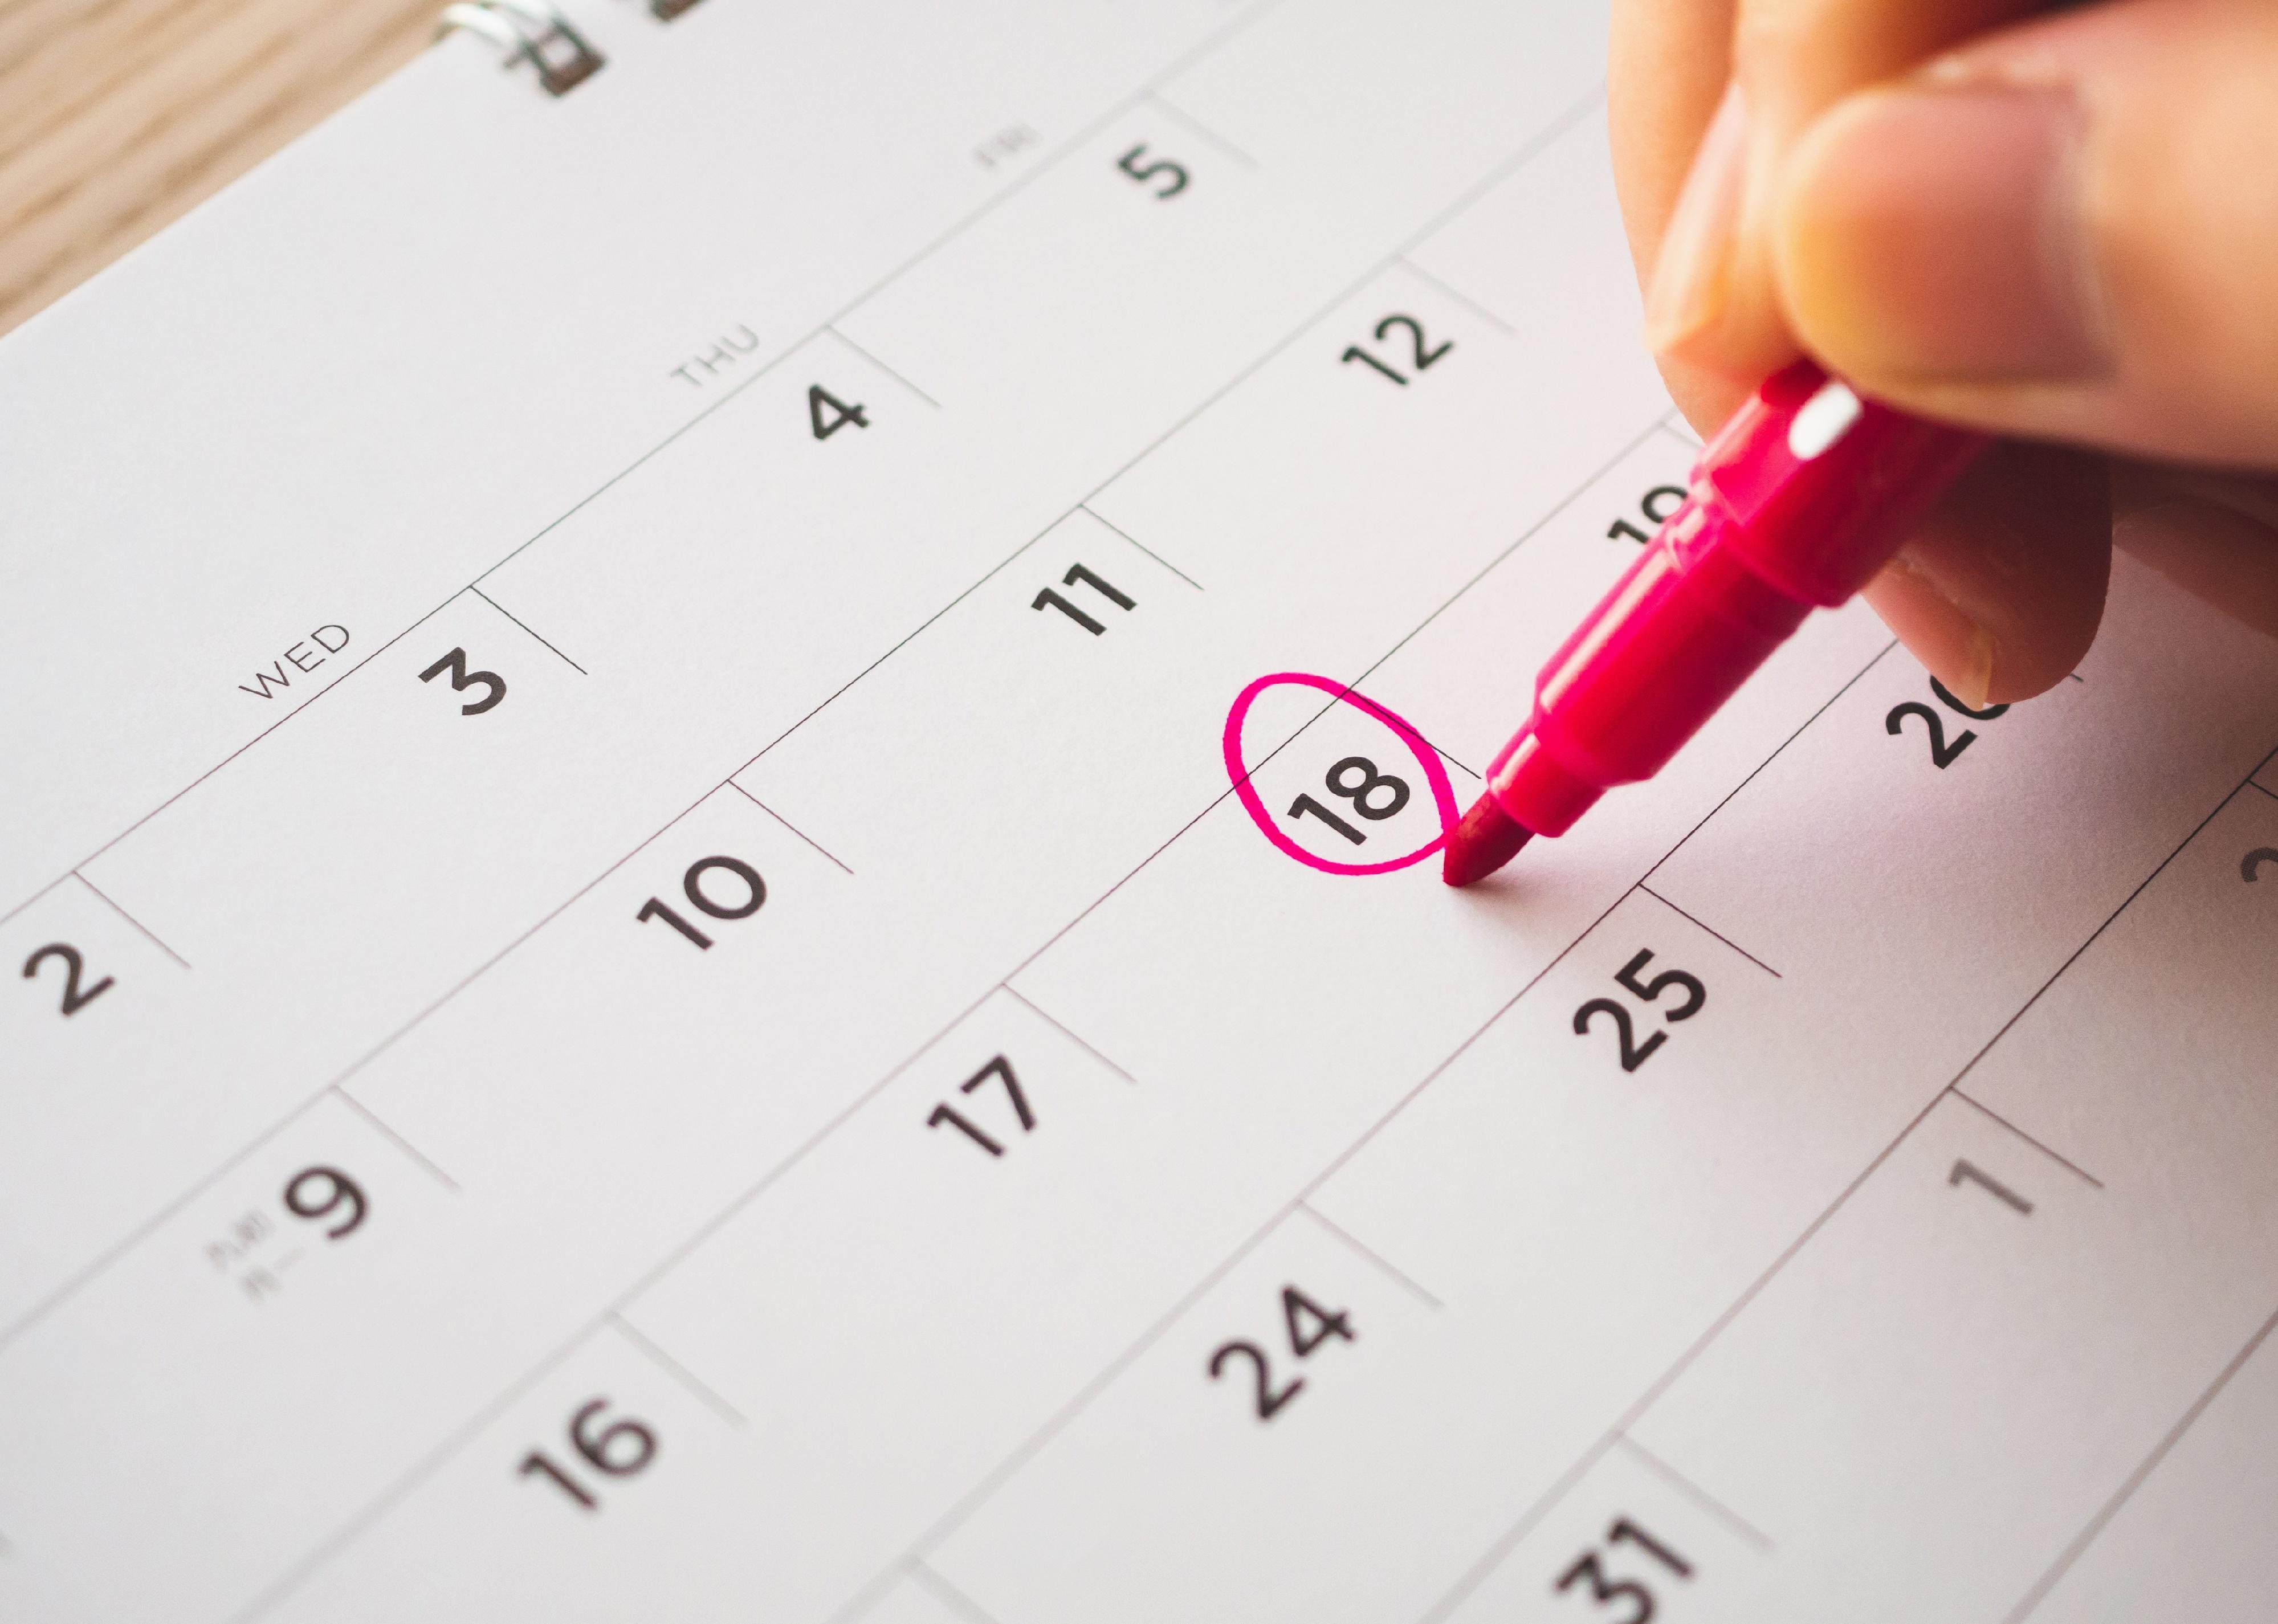 Person using pen to mark on calendar date.